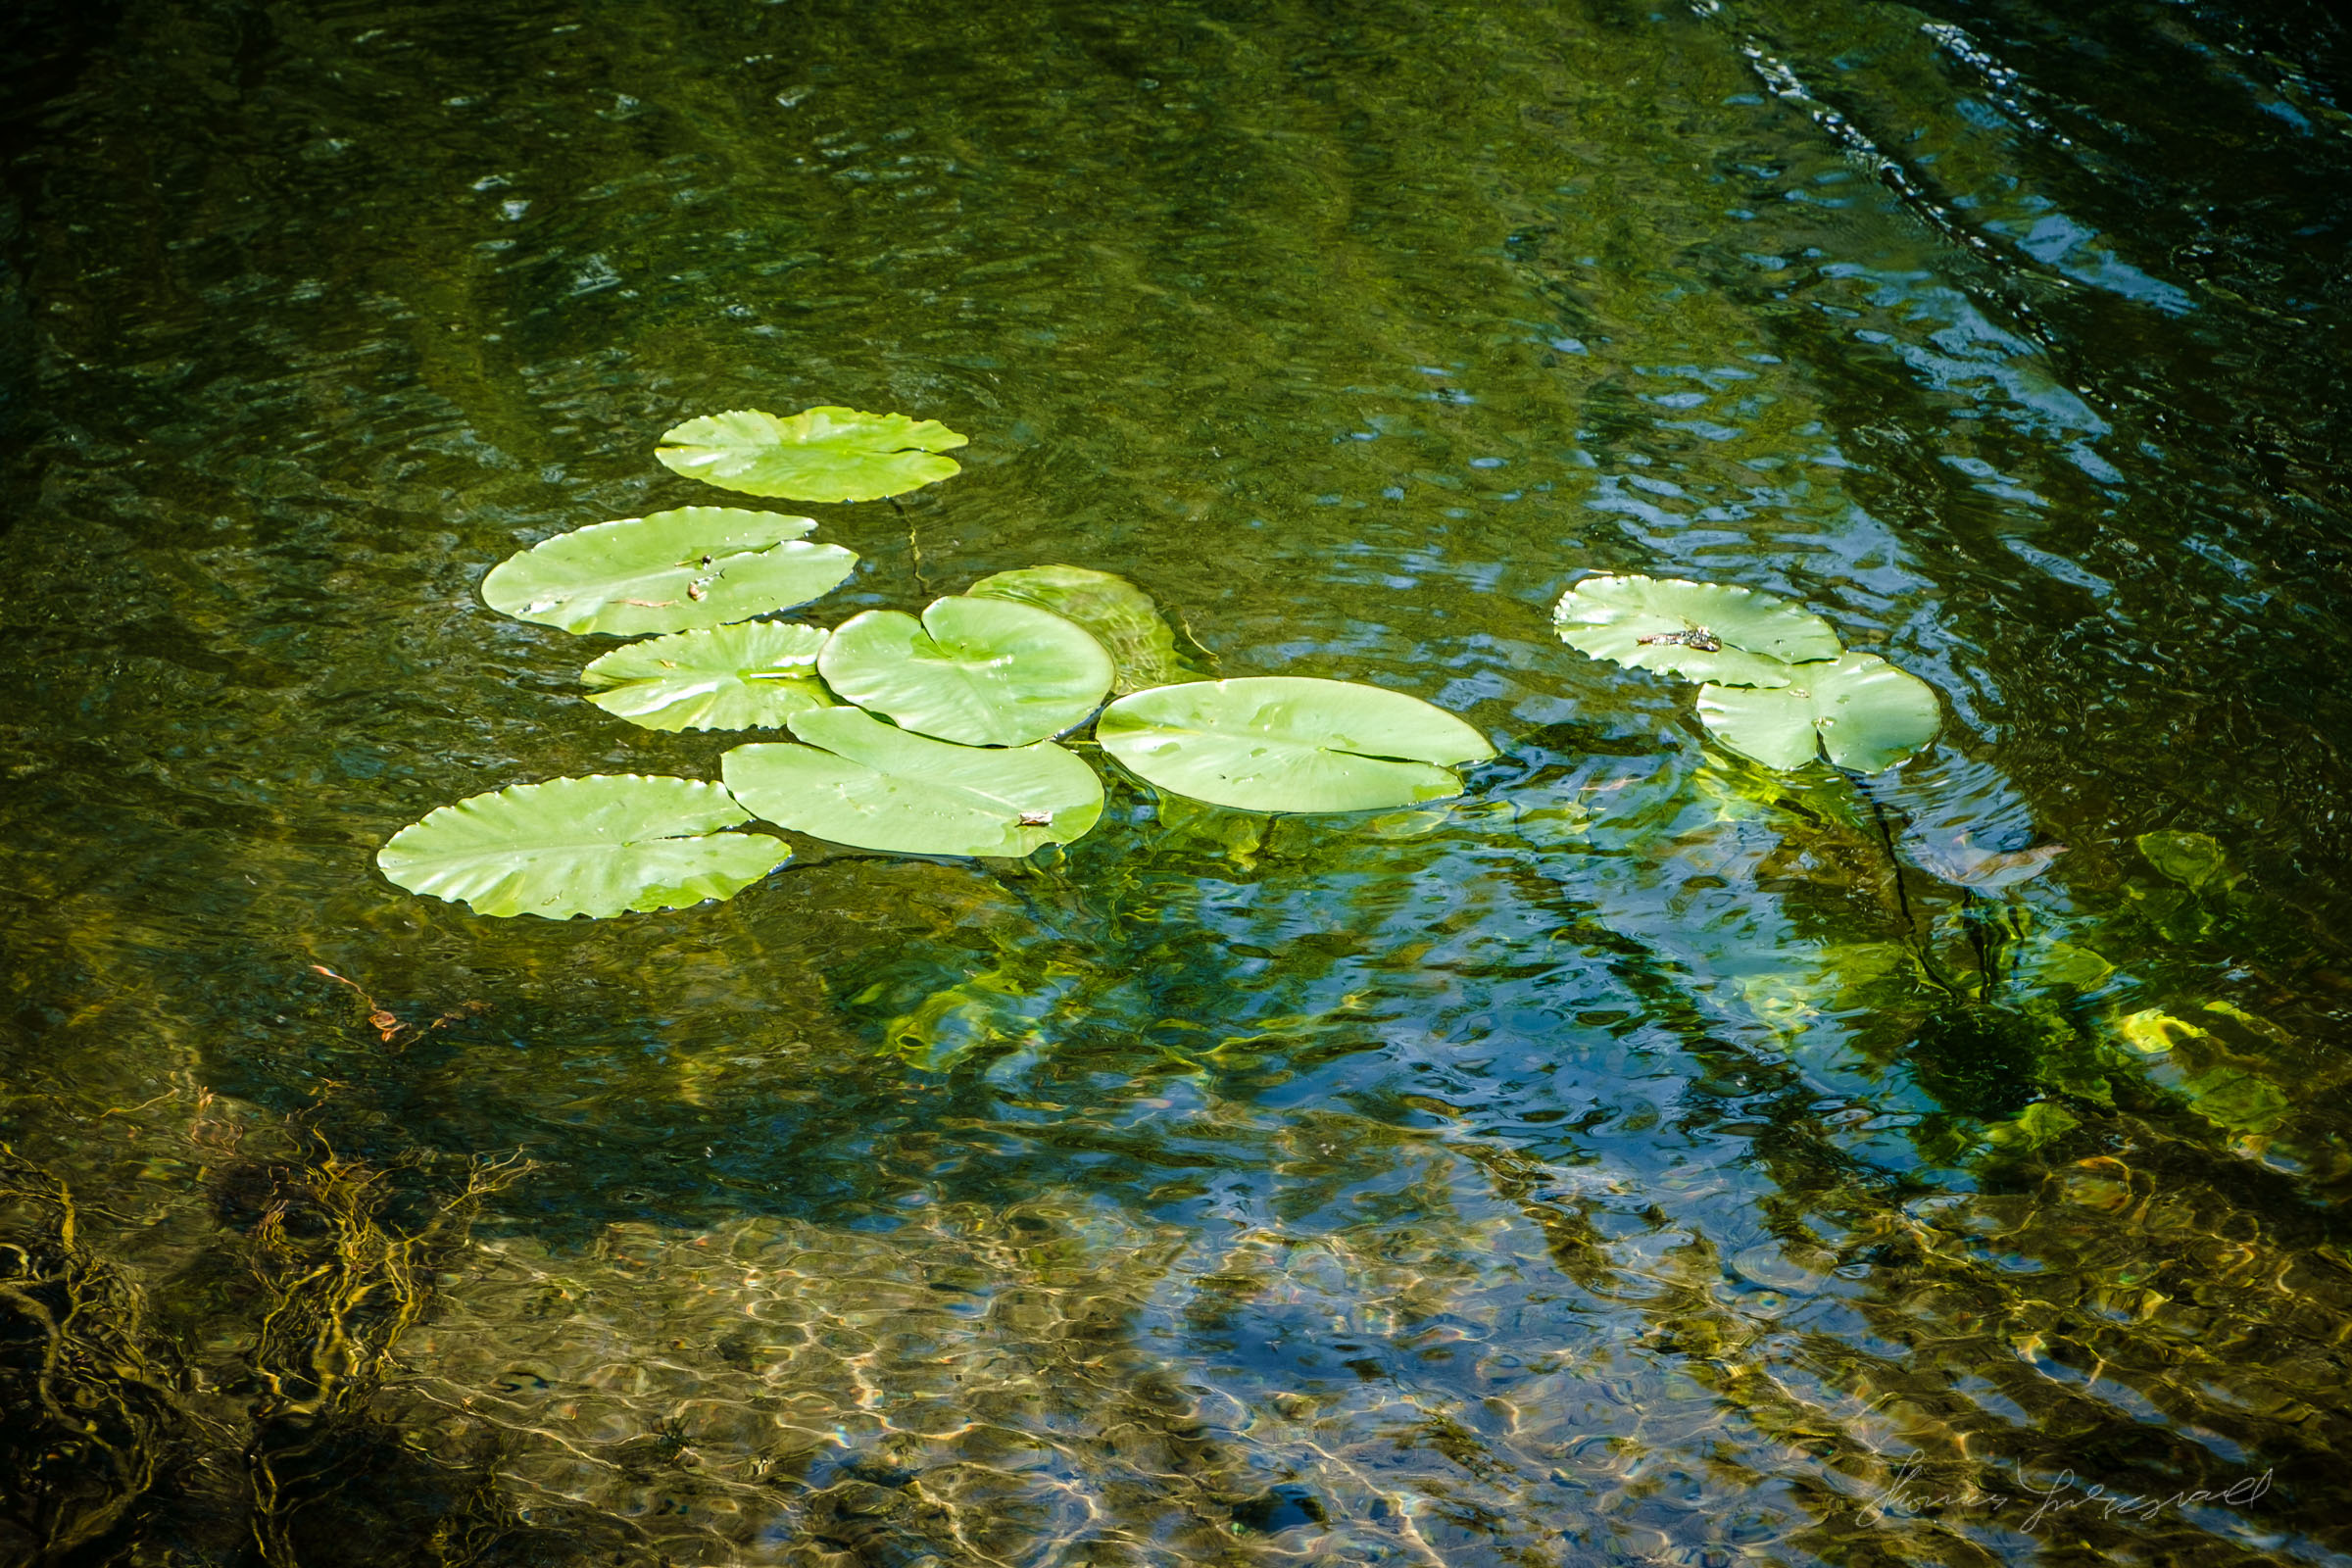 Lilly Pads in the Water